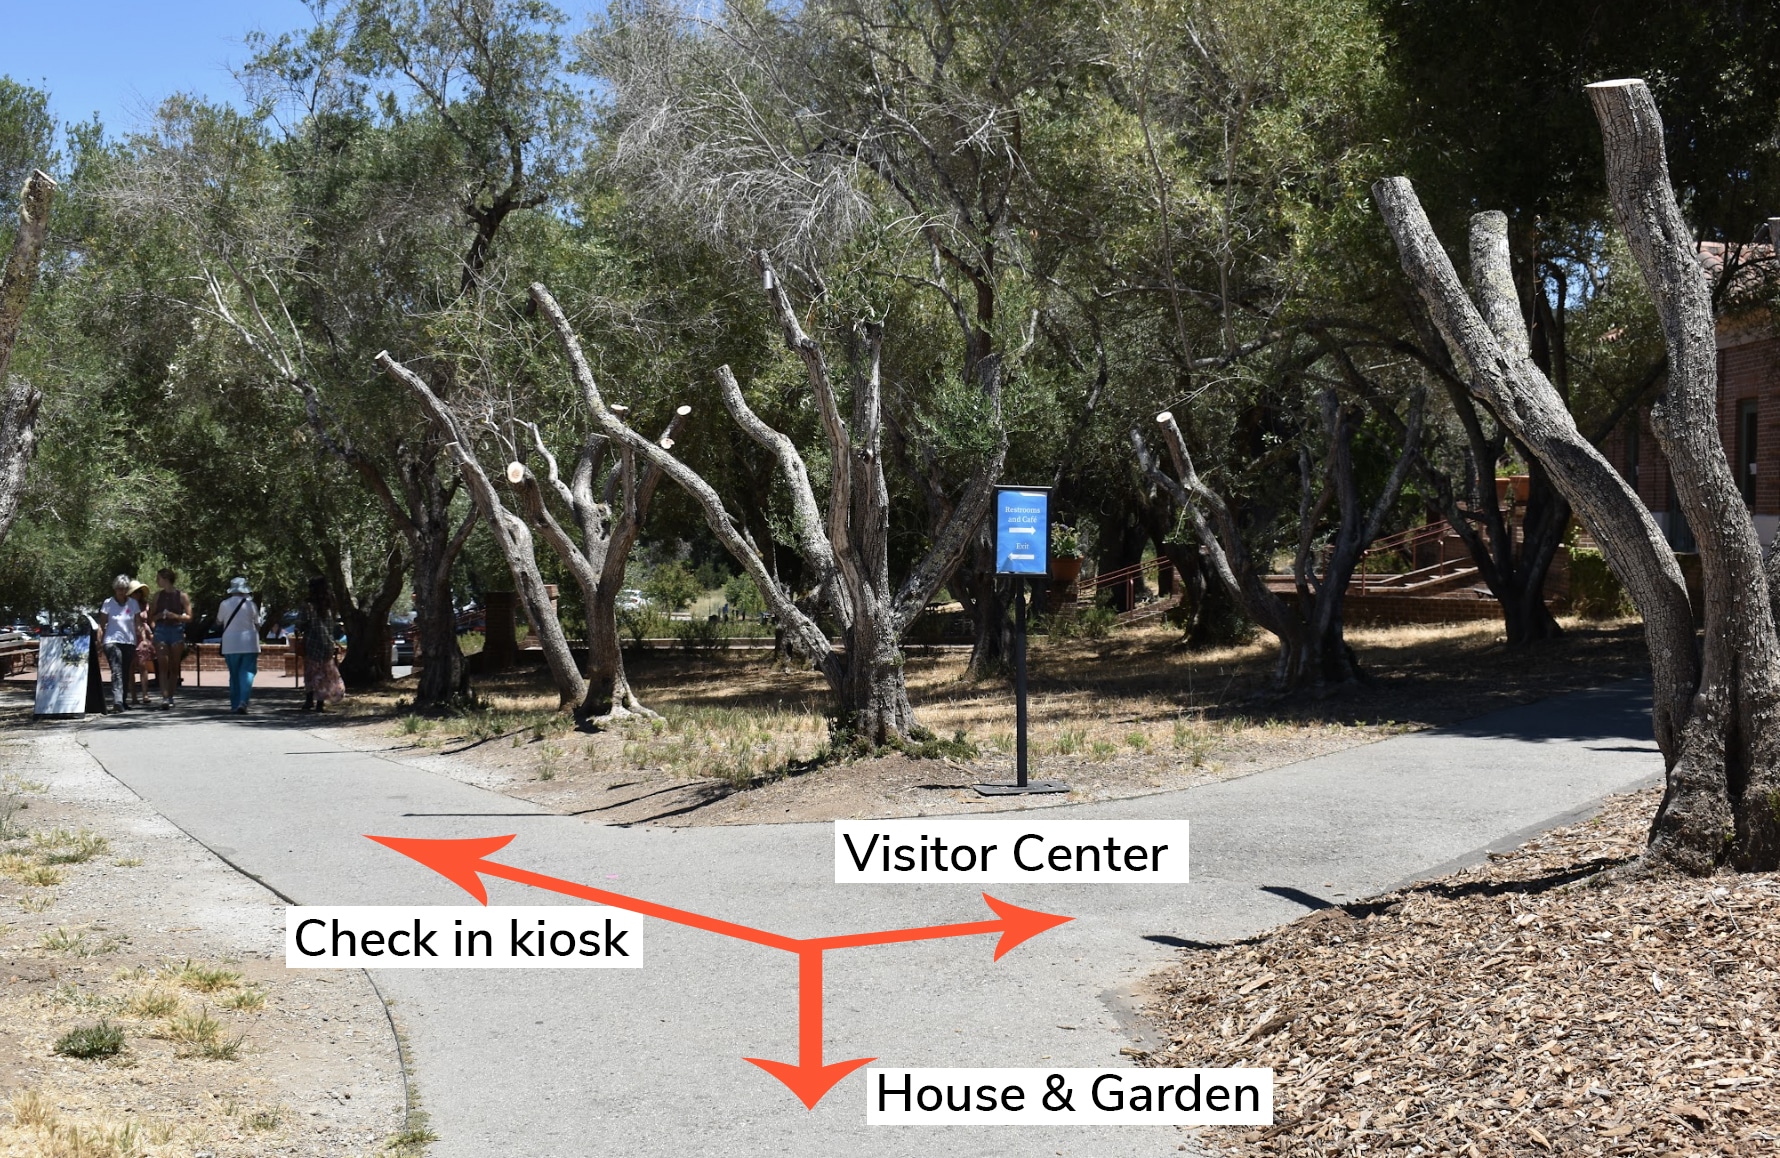 Stairless entrence from check-in Kiosk to Visitor Center and main property including House and Garden.